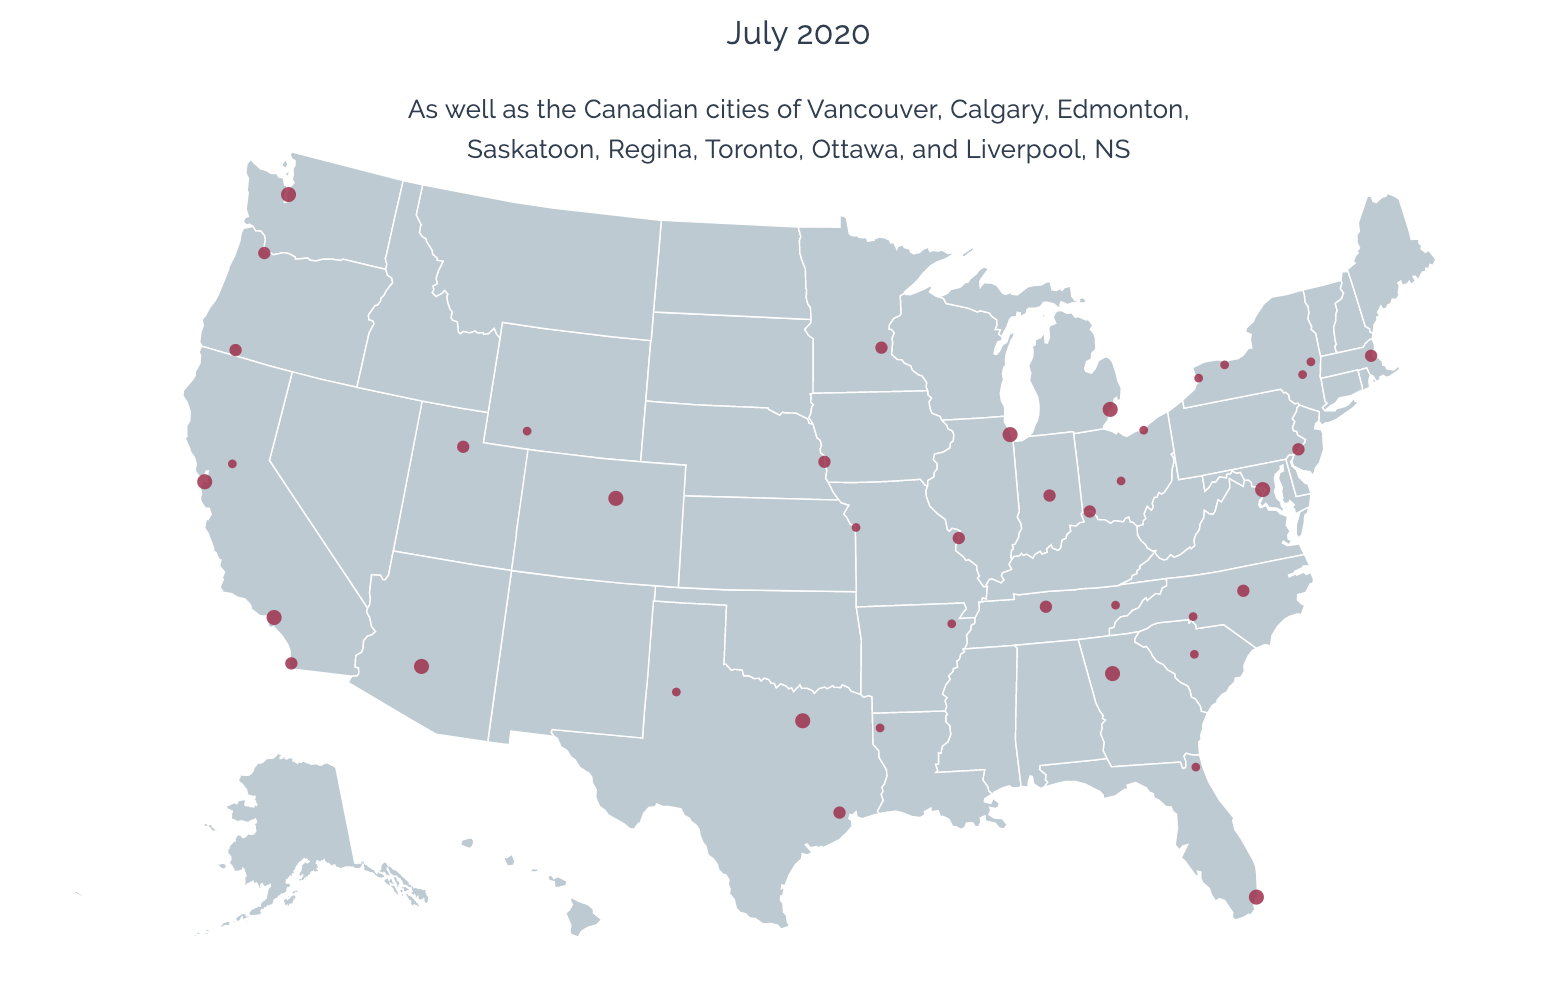 The 2020 project will be visiting roughly 50 cities across Canada and the mainland USA.